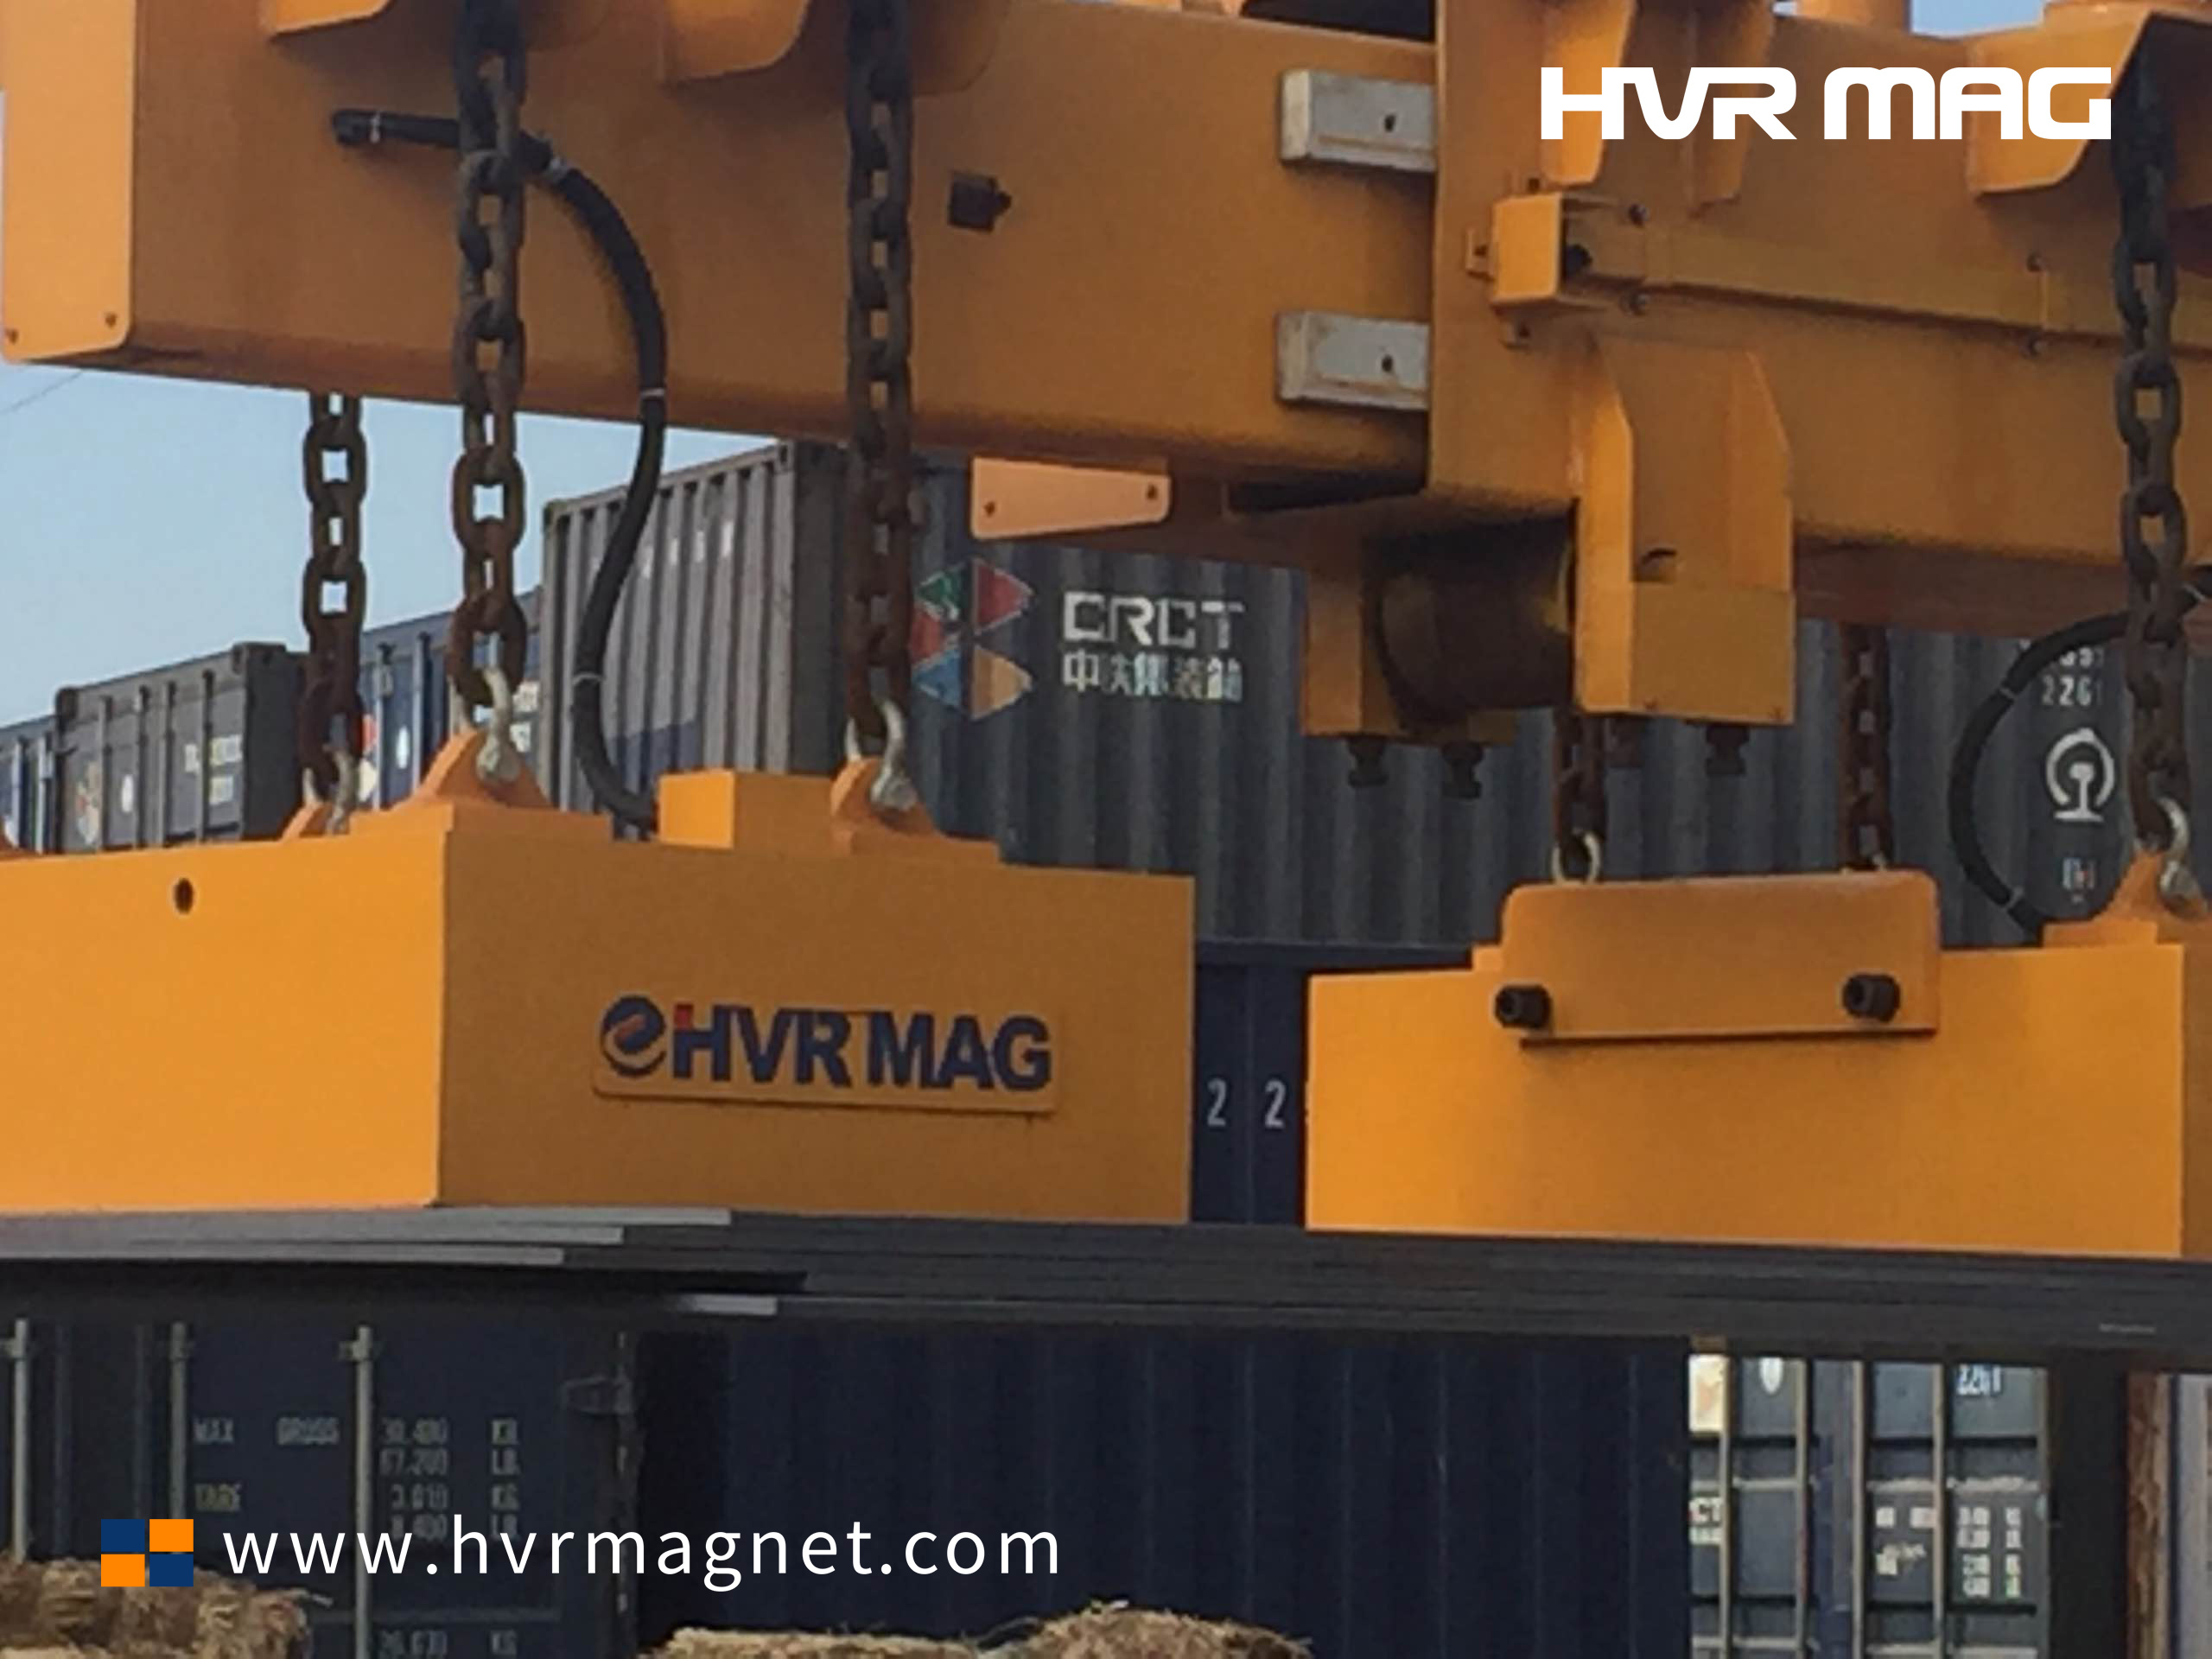 Magnetic Steel Sheet Lifting Device in Freight Yard - HVR MAG